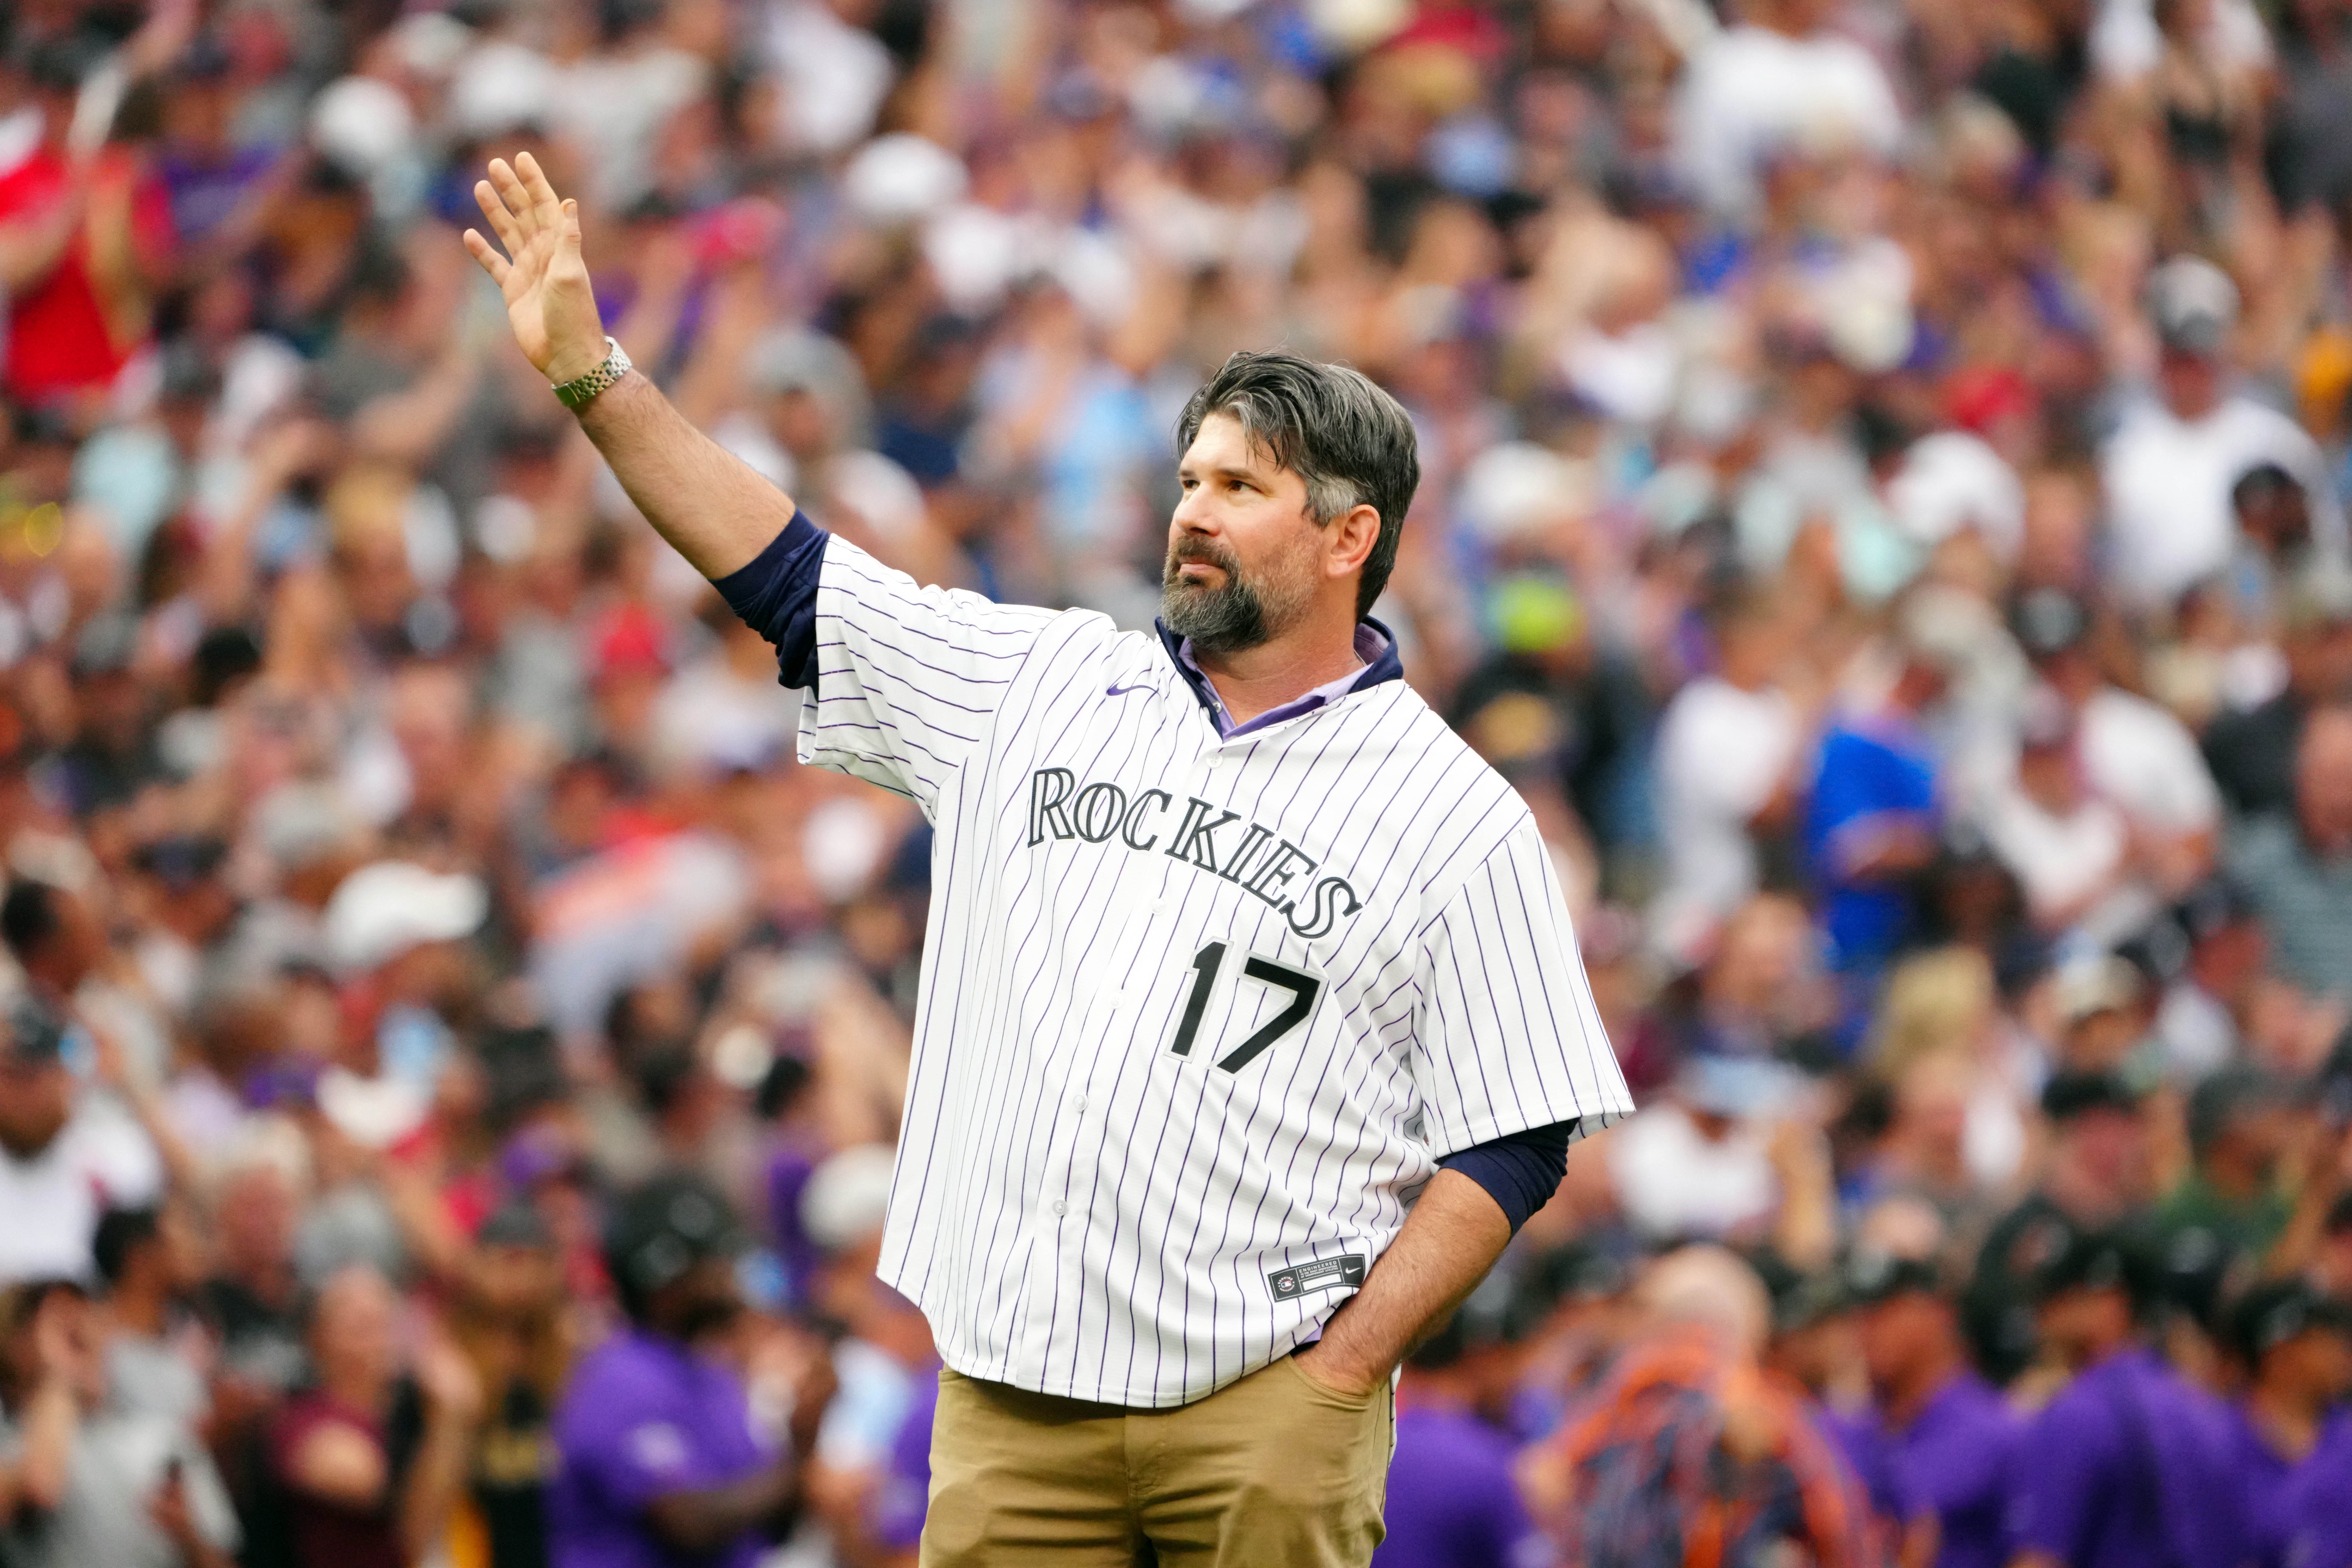 Todd Helton's Hall of Fame chance looks like a “nail-biter